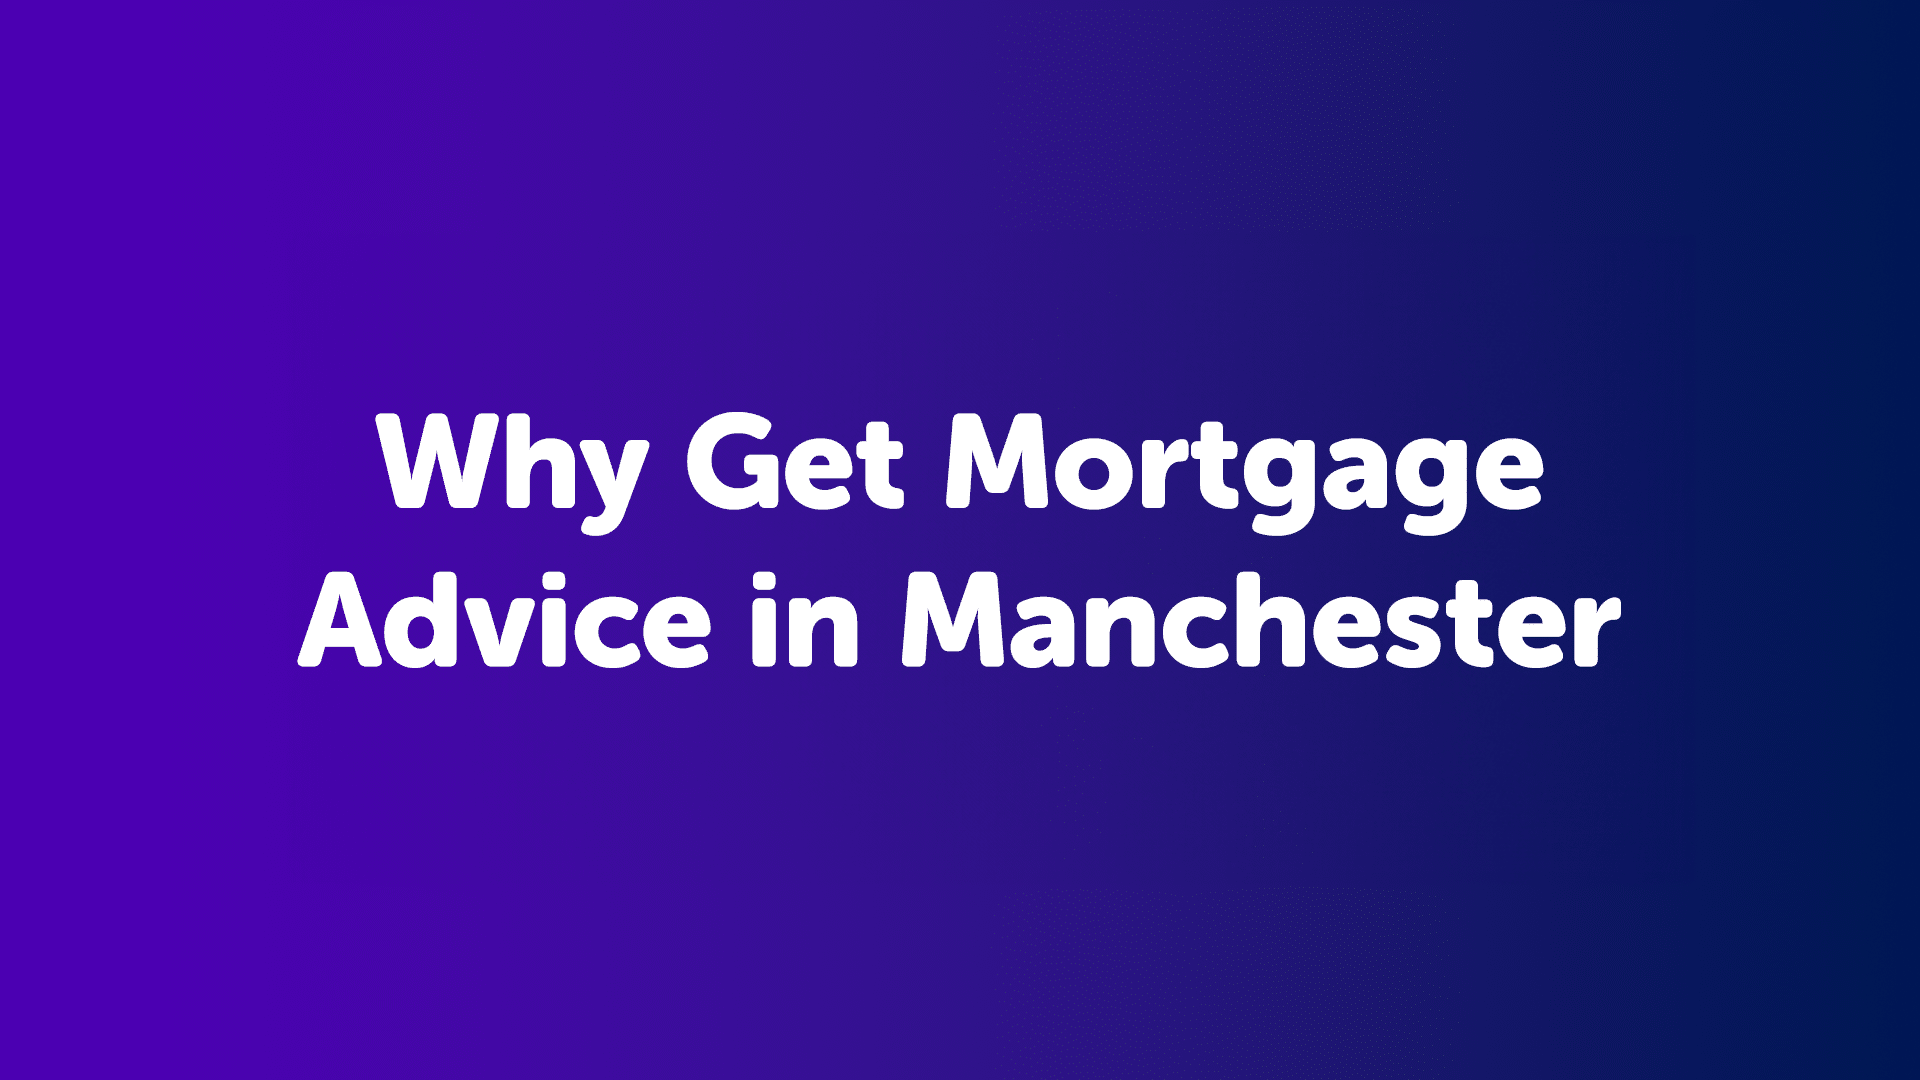 Why Get Mortgage Advice in Manchester?